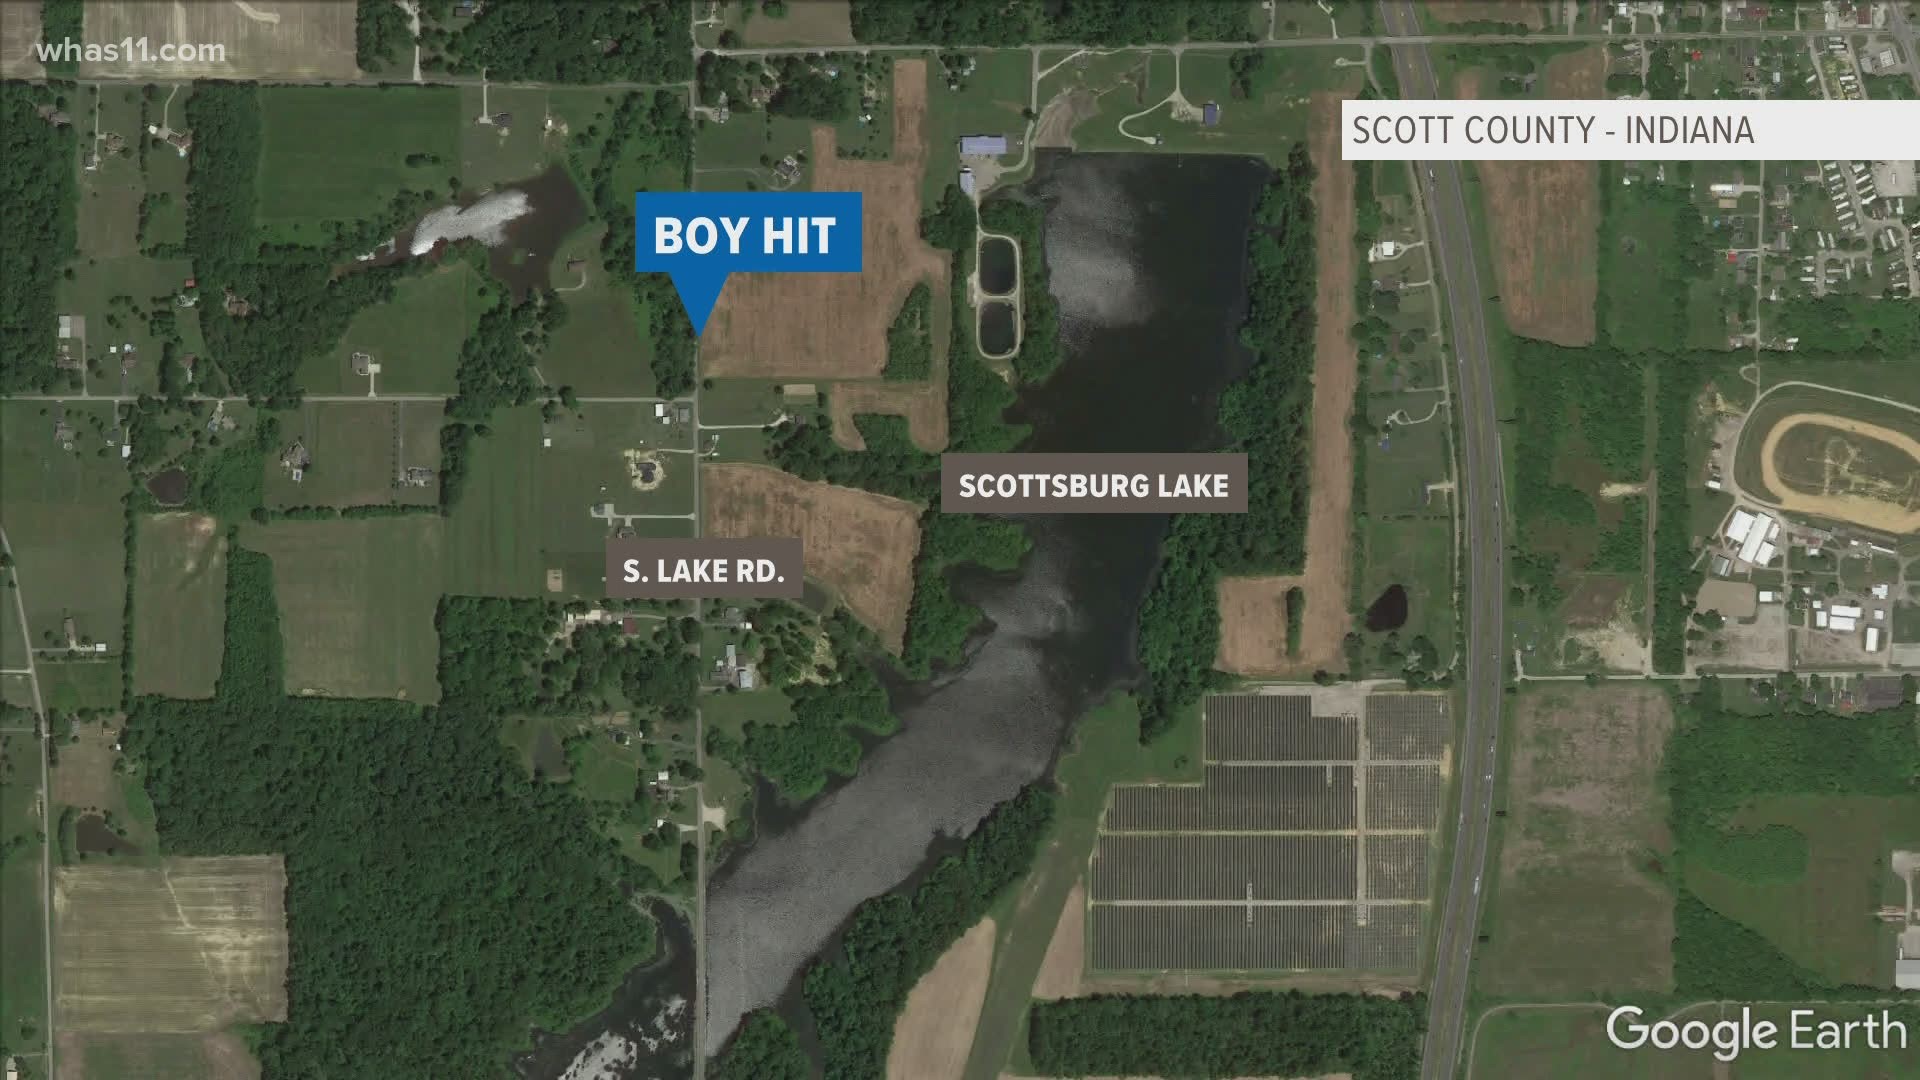 The Scott County Sheriff's Office said the 10-year-old was allegedly struck by a car driven by a 17-year-old. The boy later died from his injuries at the hospital.